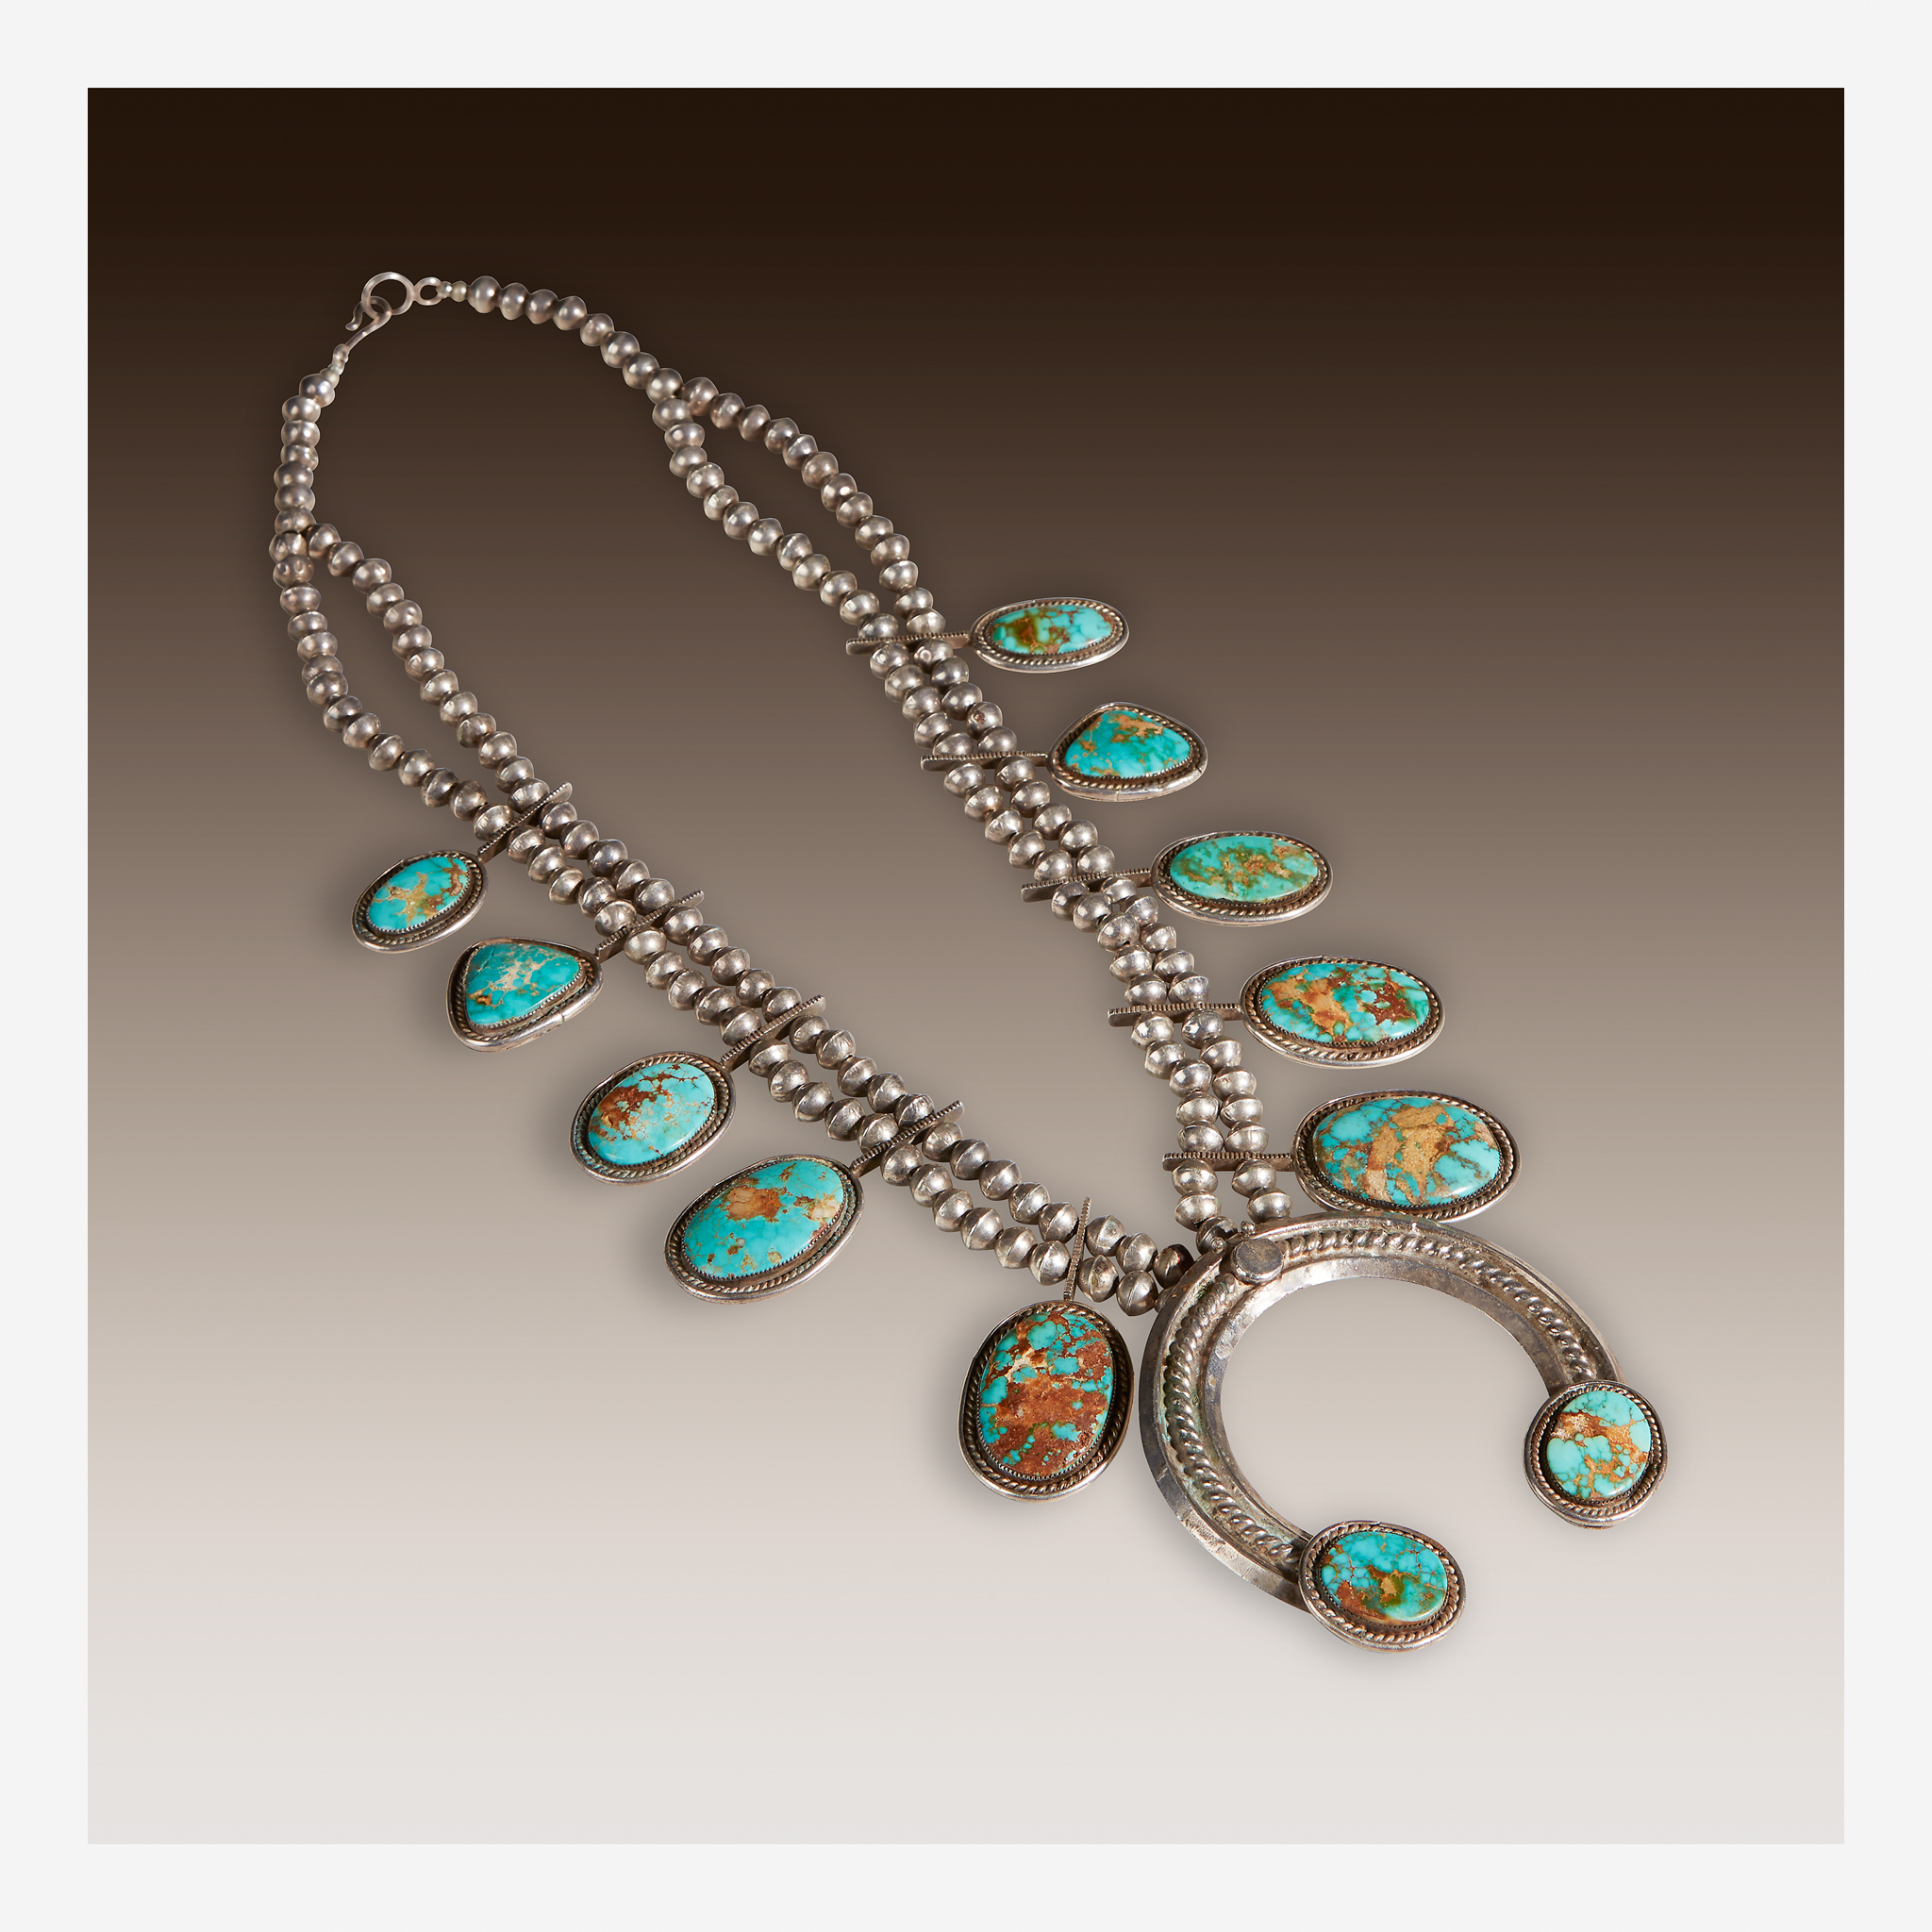 Three Navajo silver and turquoise Squash blossom necklaces, 20th century - Image 3 of 5